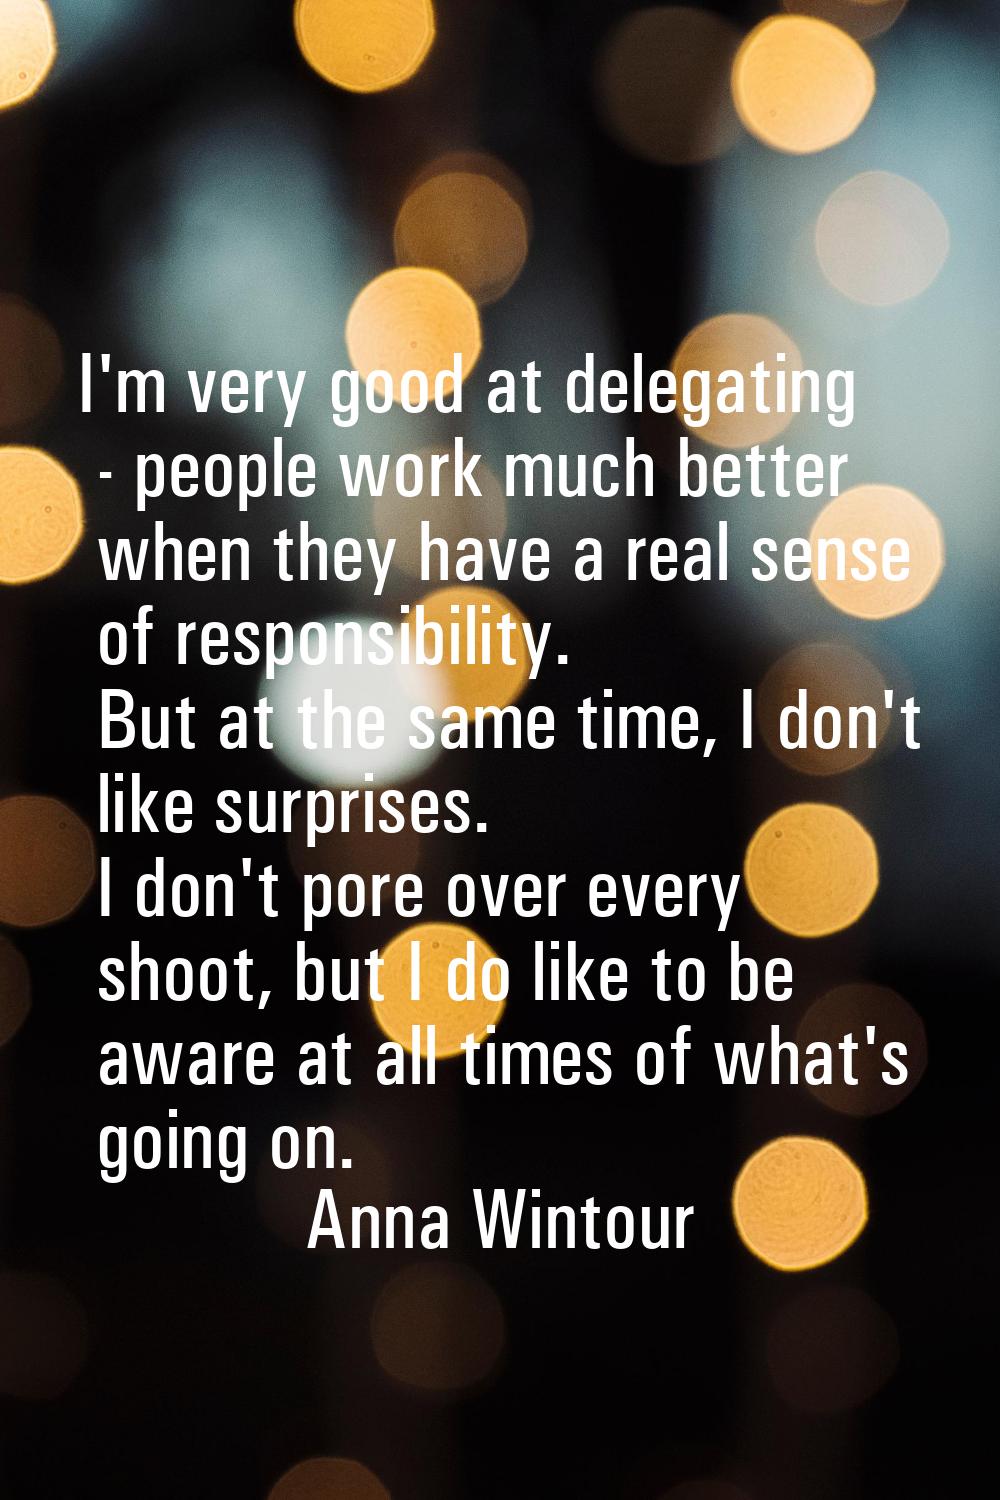 I'm very good at delegating - people work much better when they have a real sense of responsibility